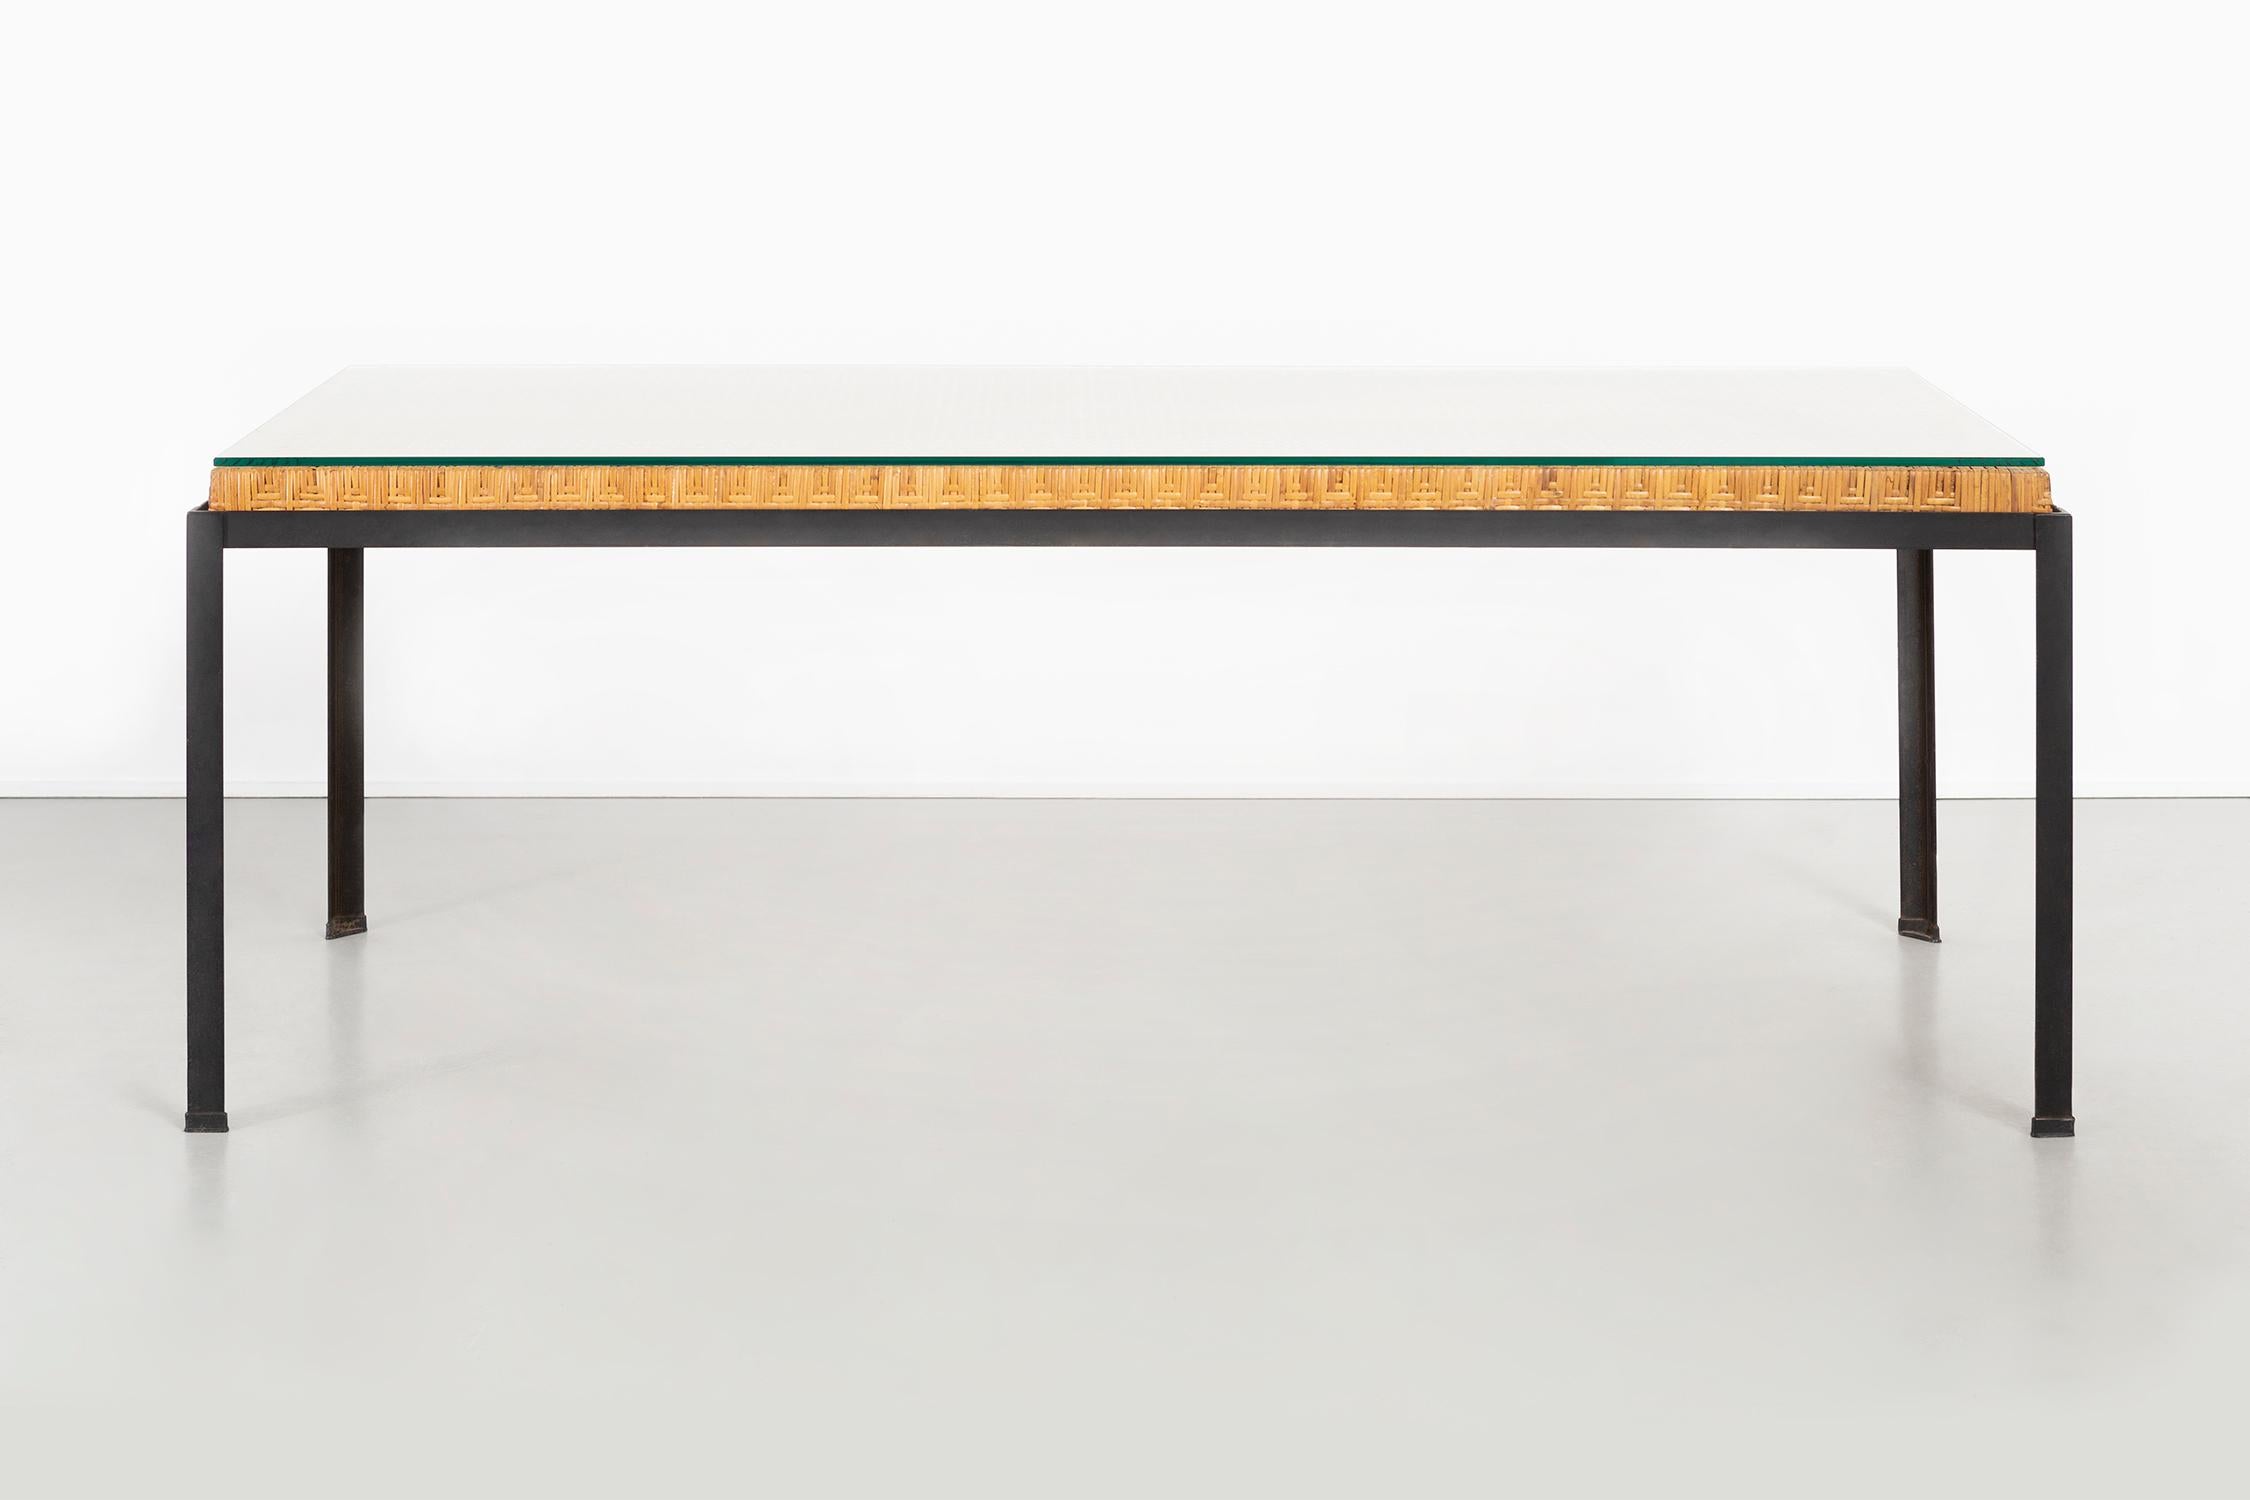 Designed by Danny Ho Fong for Tropi-cal 

USA, circa 1960s

Glass and iron and handwoven reed 

Measures: 25 ?” H x 73 ½” W x 30 ¾” D.

Great patina with a new glass top

This table is suitable as an intimate dining table, desk or console